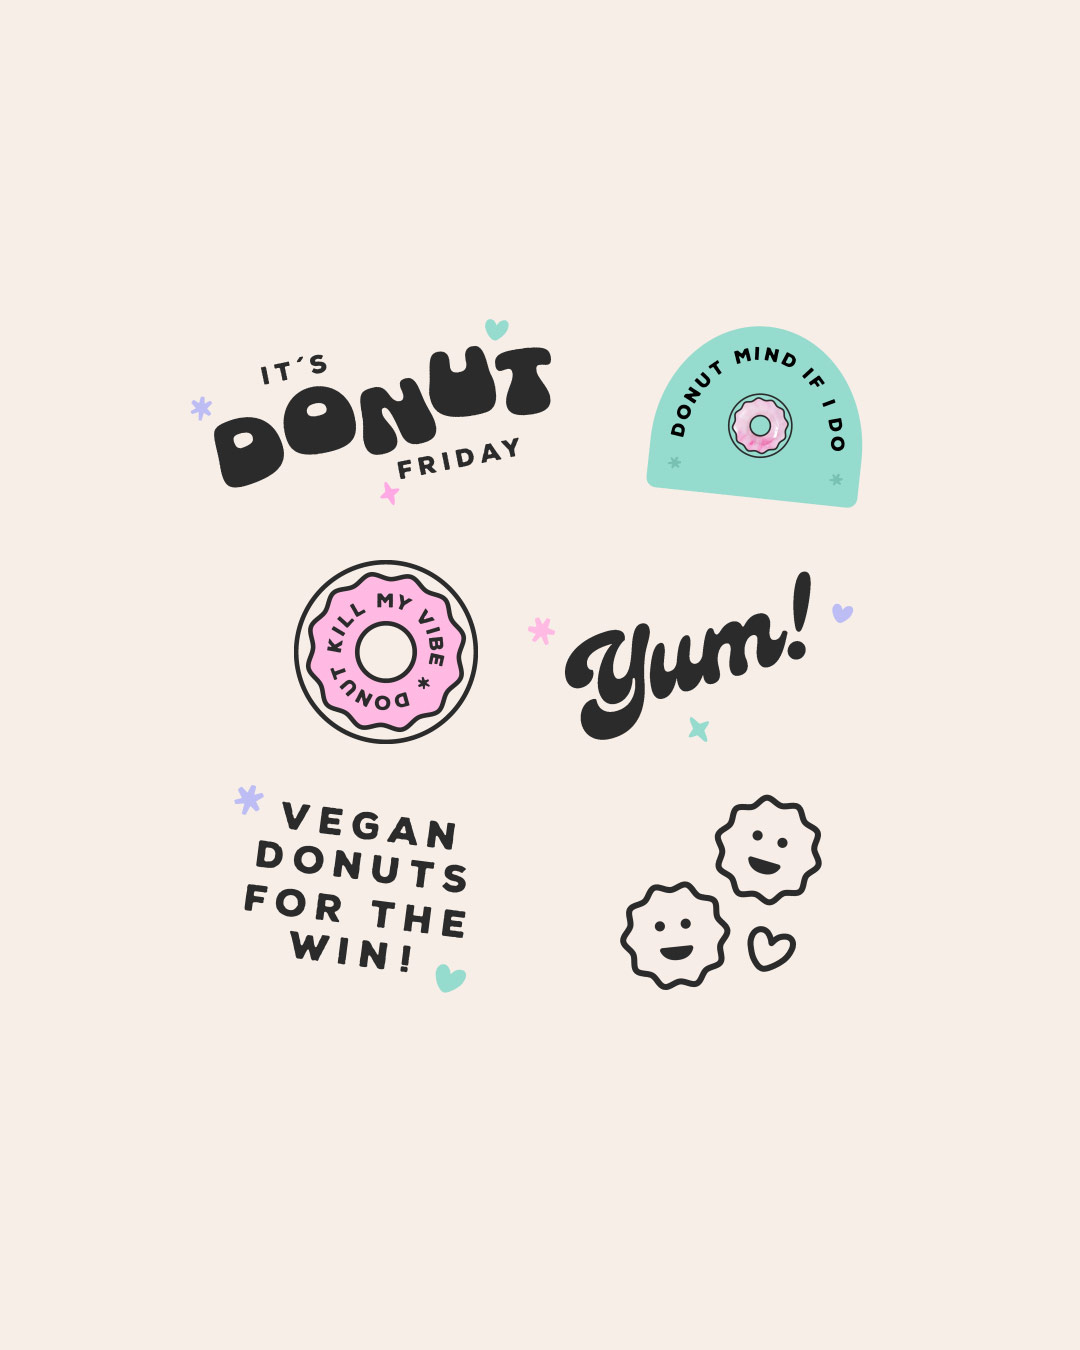 Animated gifs for Dough Joy, a plant-based, yeast-raised donut truck in Seattle - designed by Wiltshire-based graphic designer, Kaye Huett